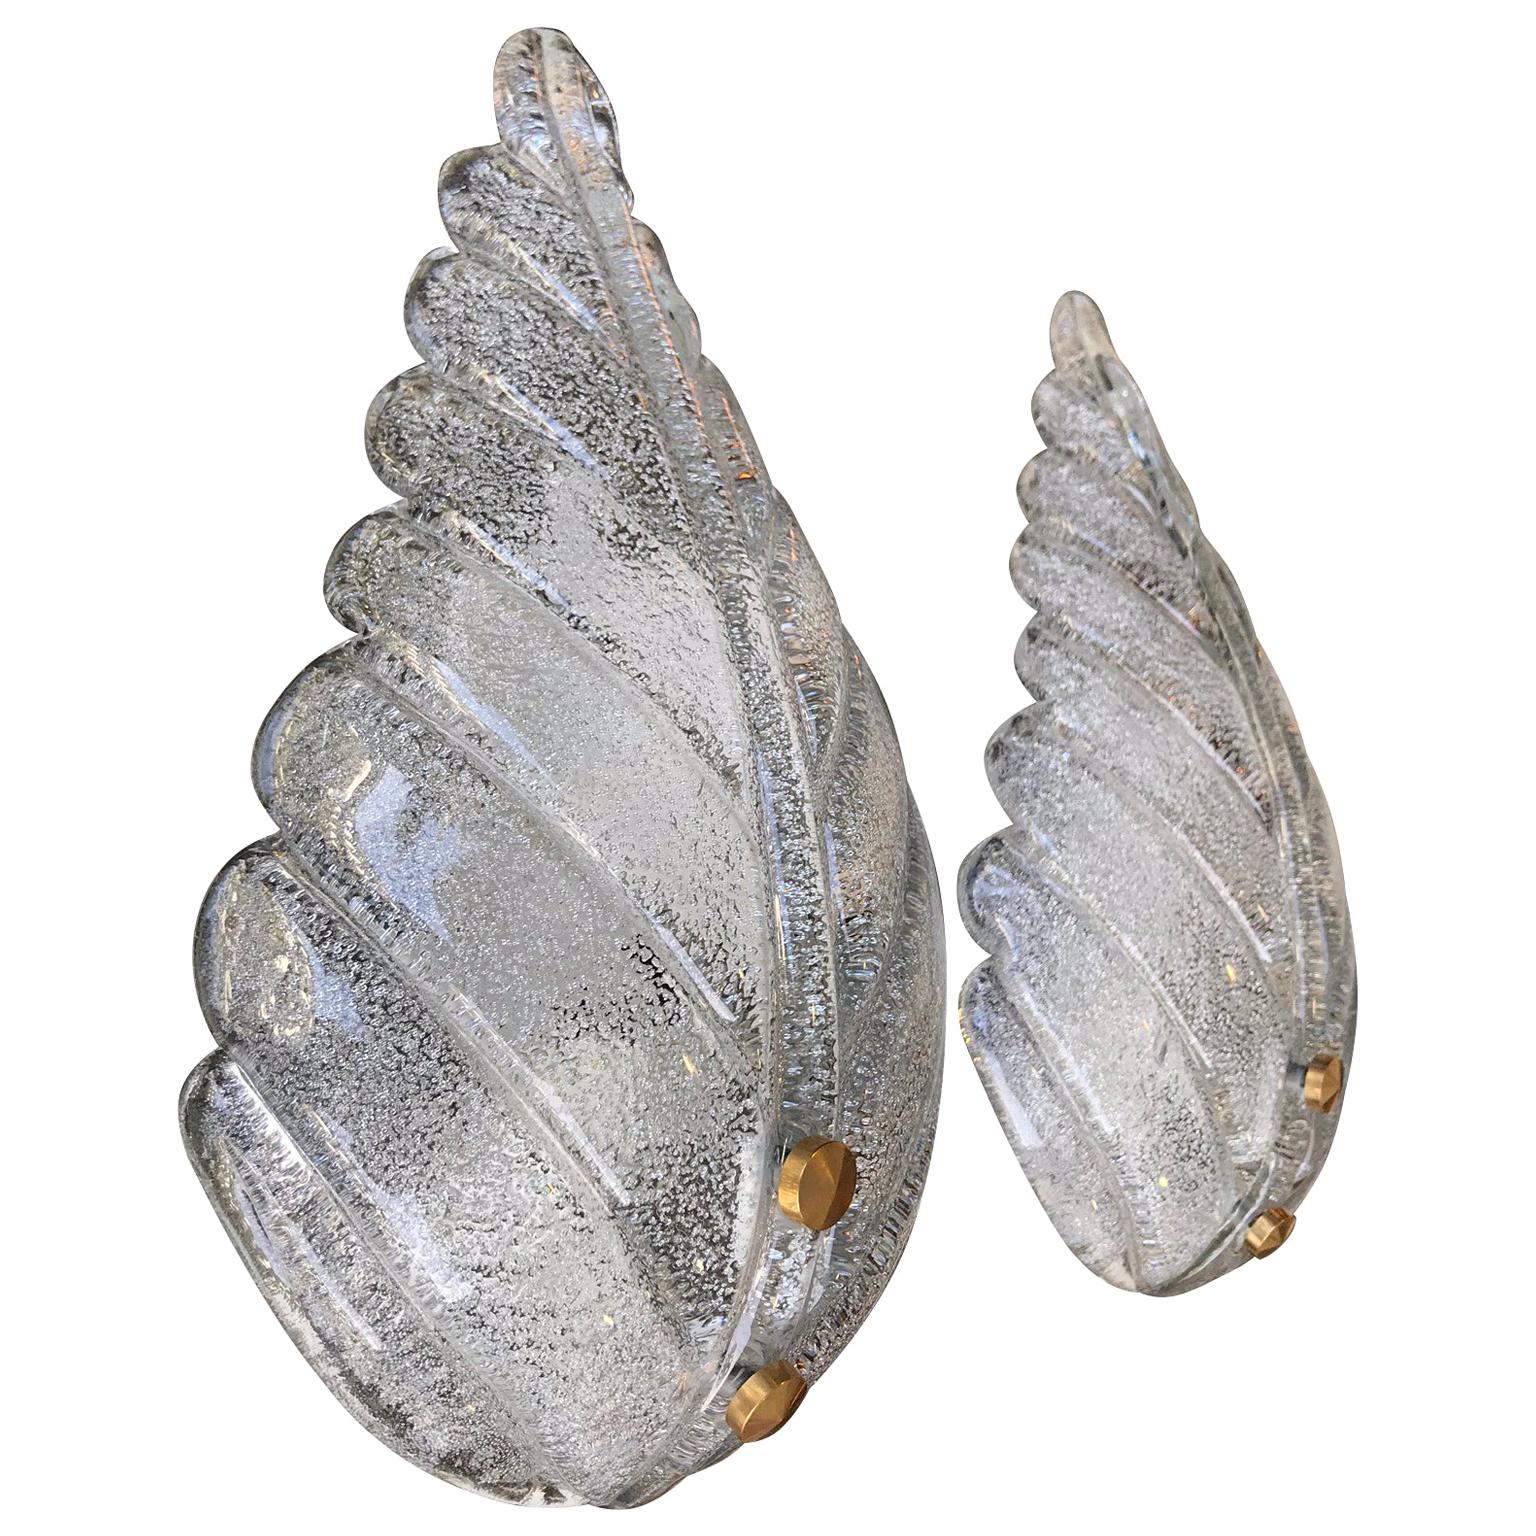 Pair of Textured Murano Glass Leaf Wall Sconces with Brass Screw Fittings